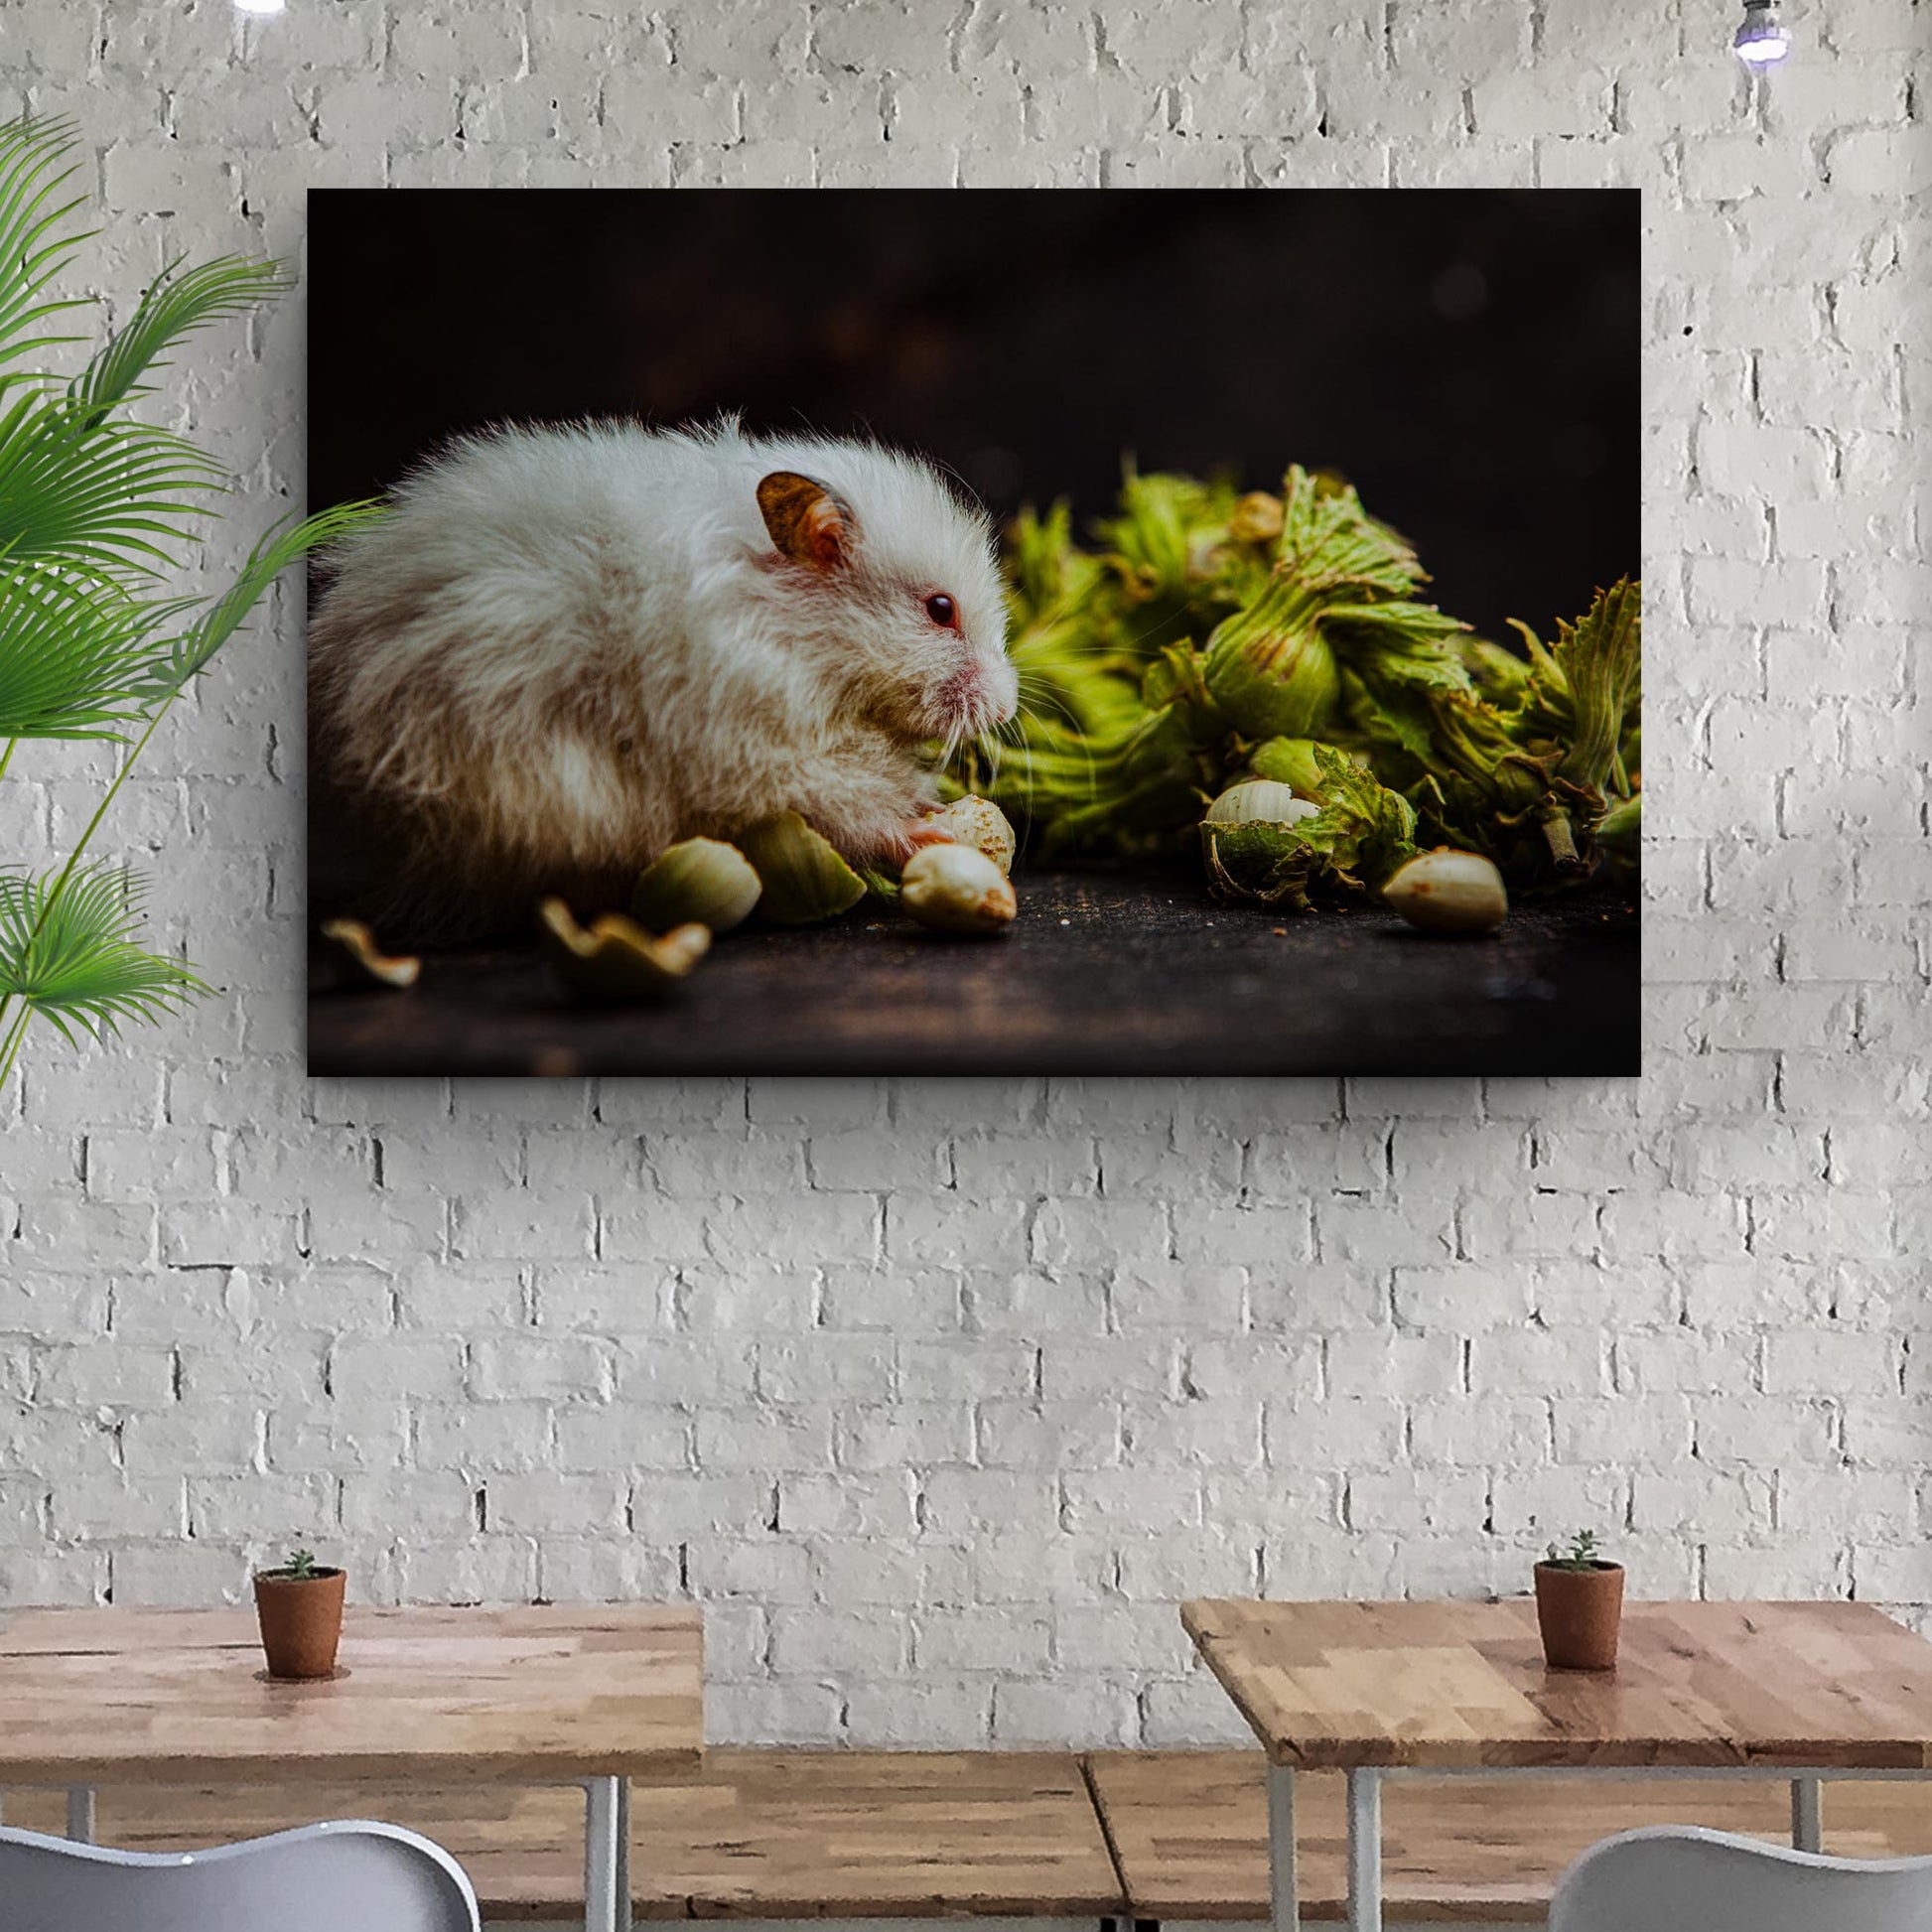 Eating Hamster Canvas Wall Art Style 2 - Image by Tailored Canvases